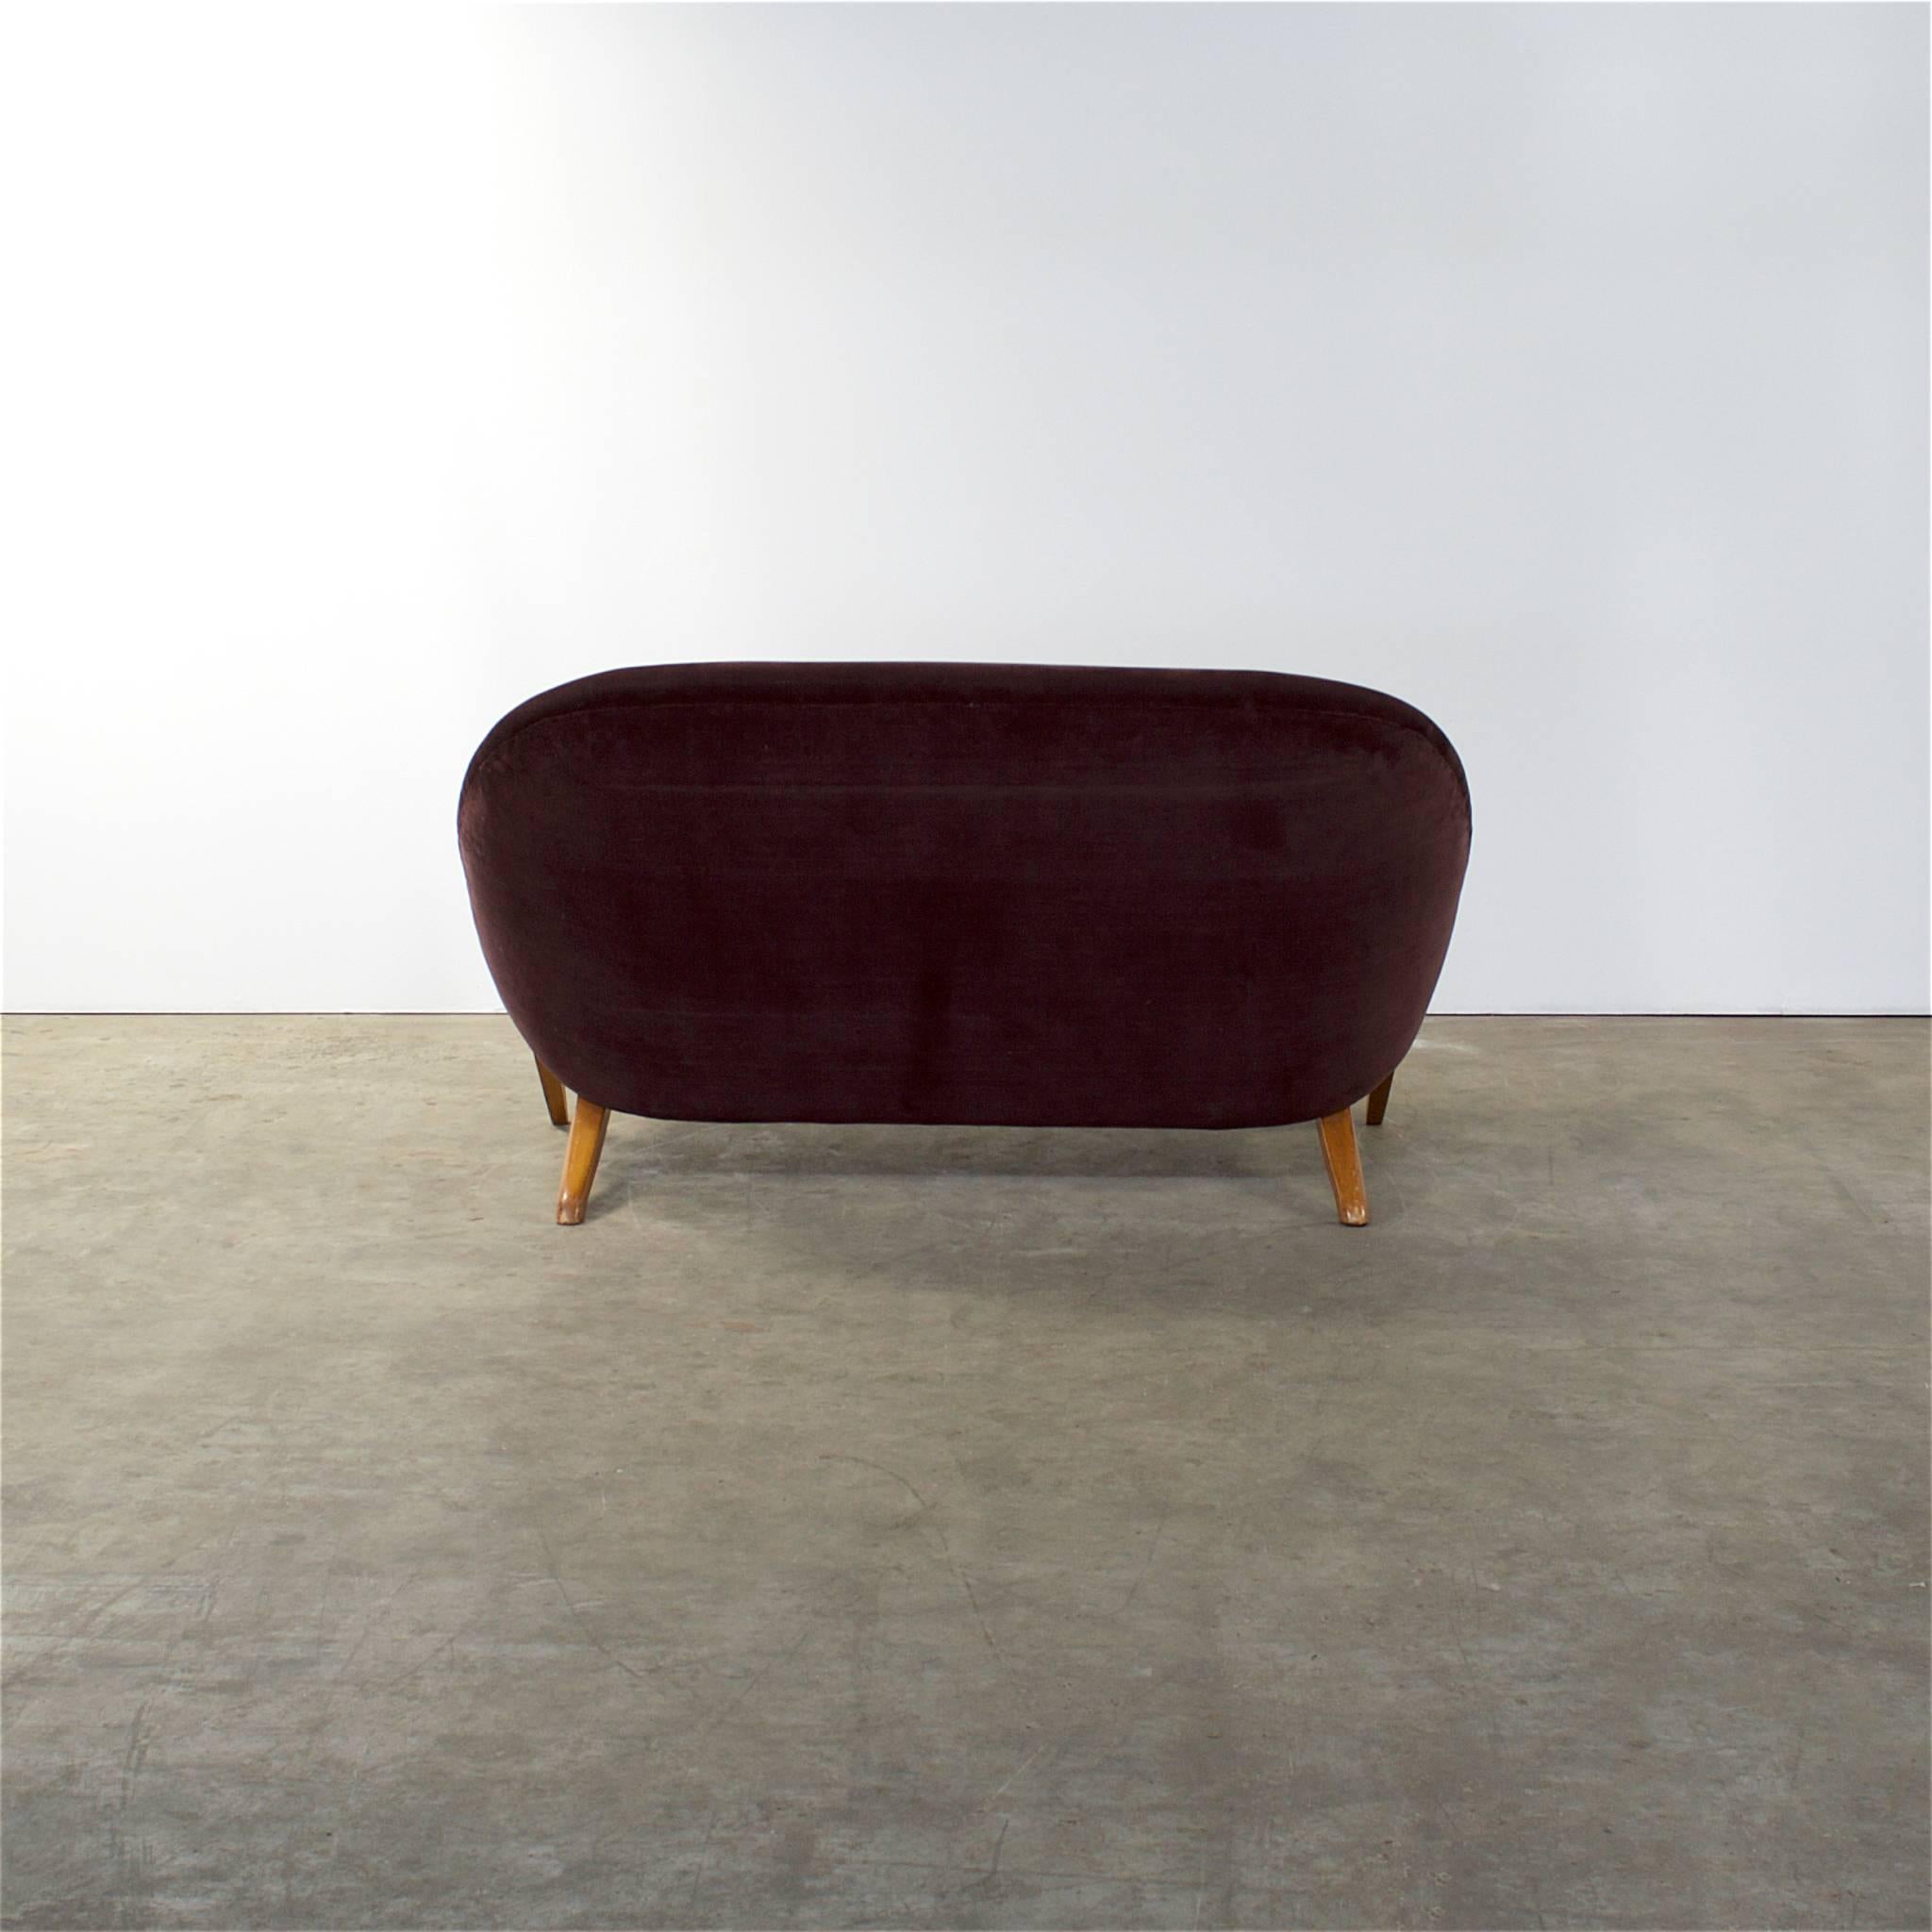 1950s Artifort Sofa “Congo” by Theo Ruth In Good Condition For Sale In Amstelveen, Noord